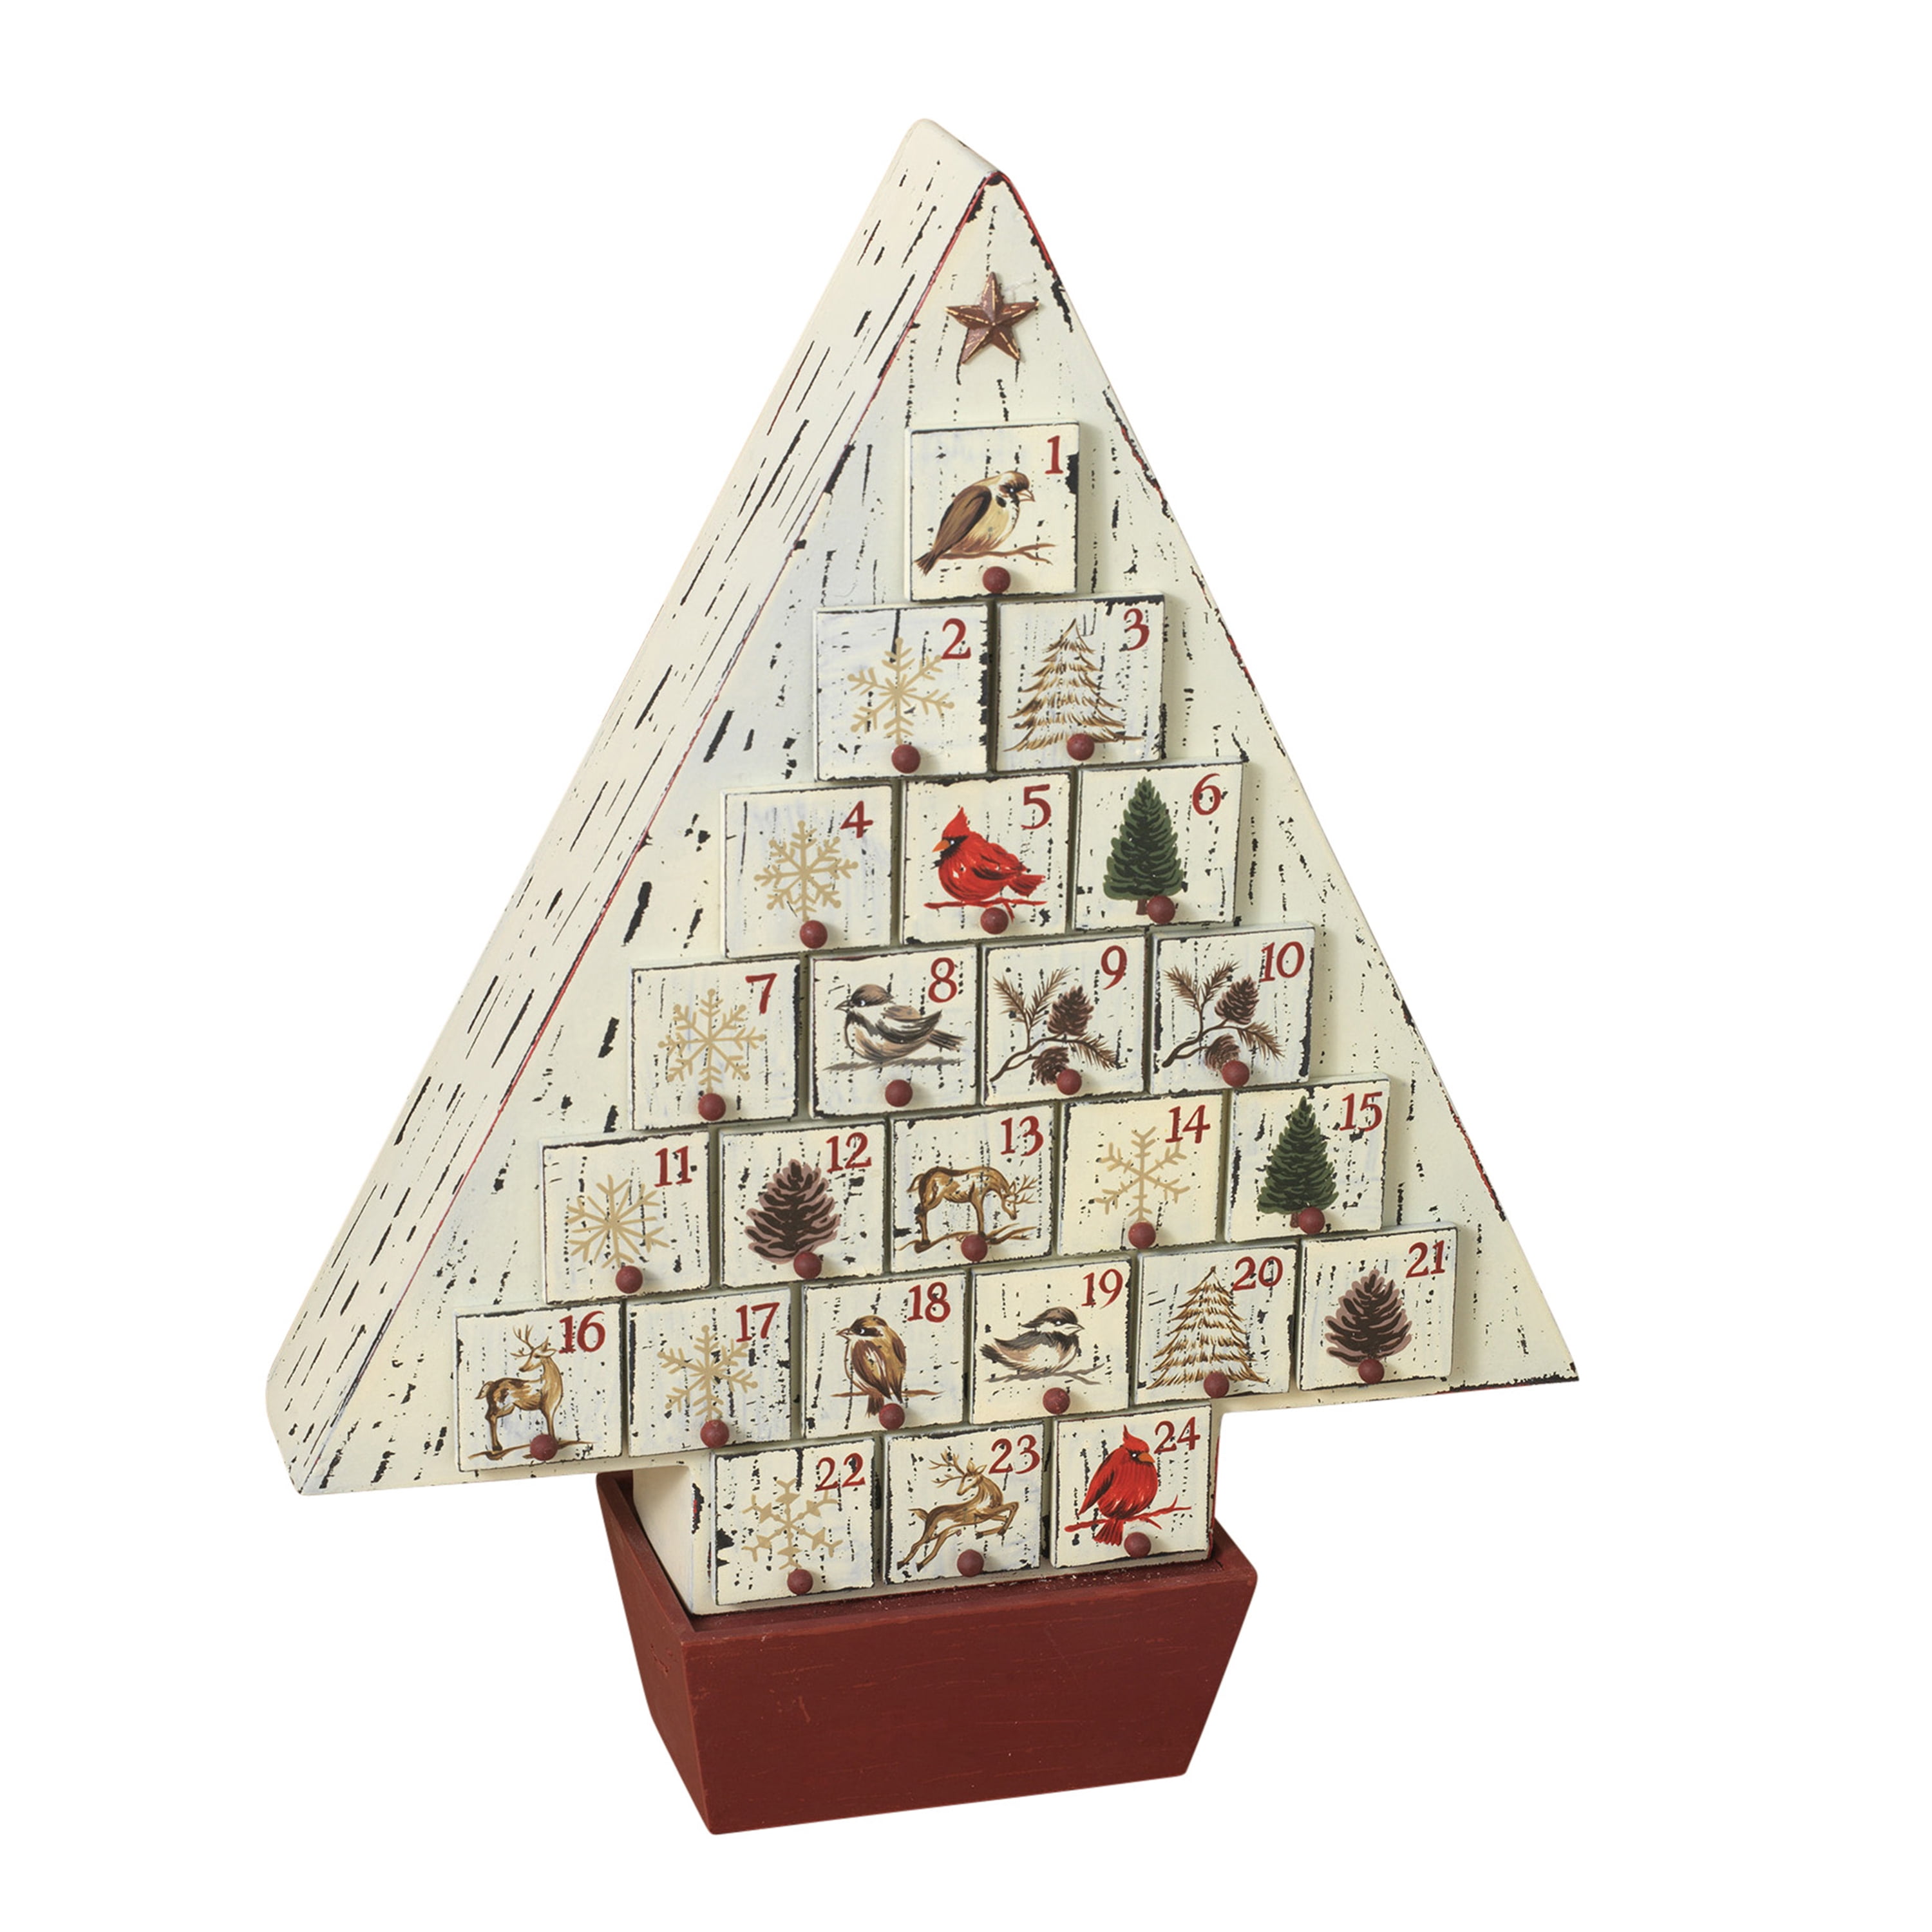 Personalised Christmas Advent Calendar Wooden Xmas Tree Gift Chocolate